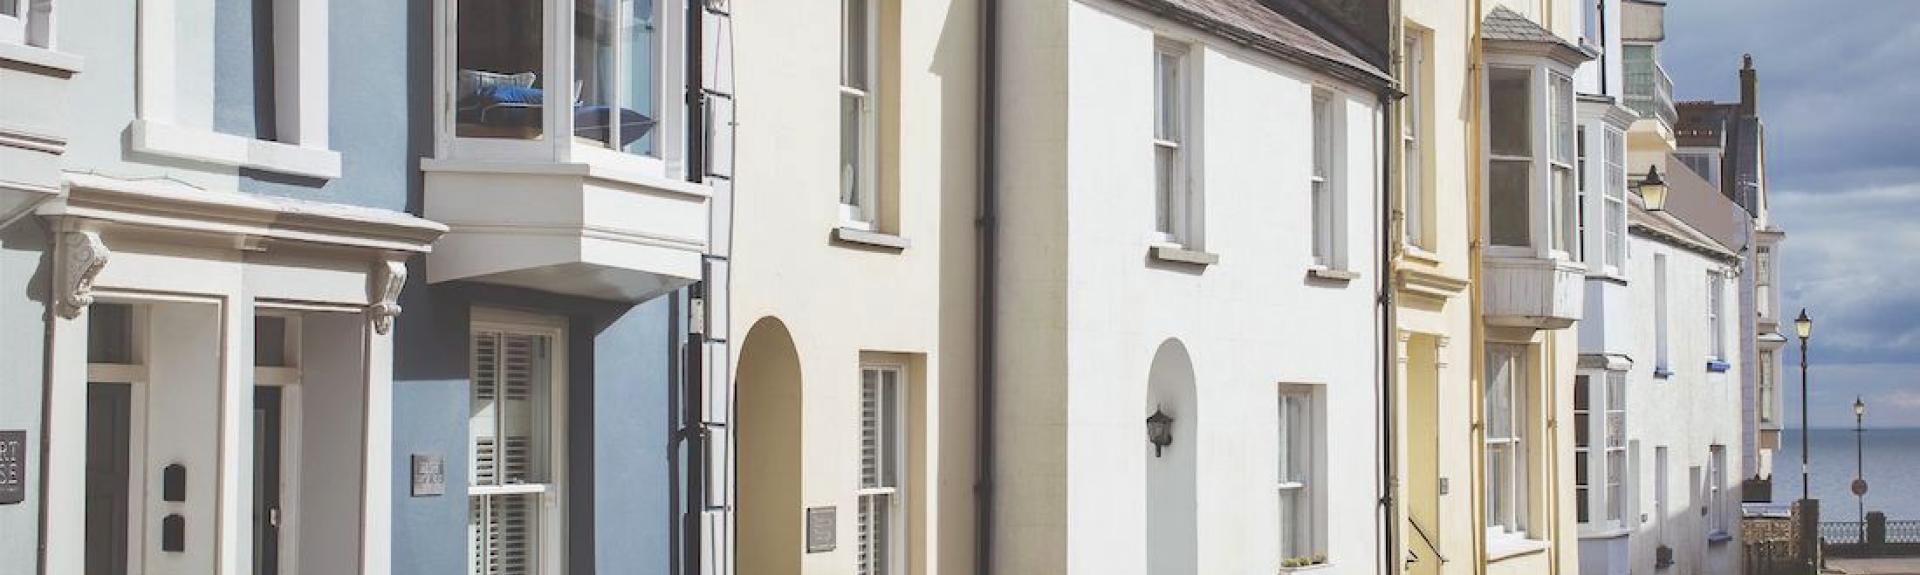 A row of Victorian town houses leading to the sae in Tenby.